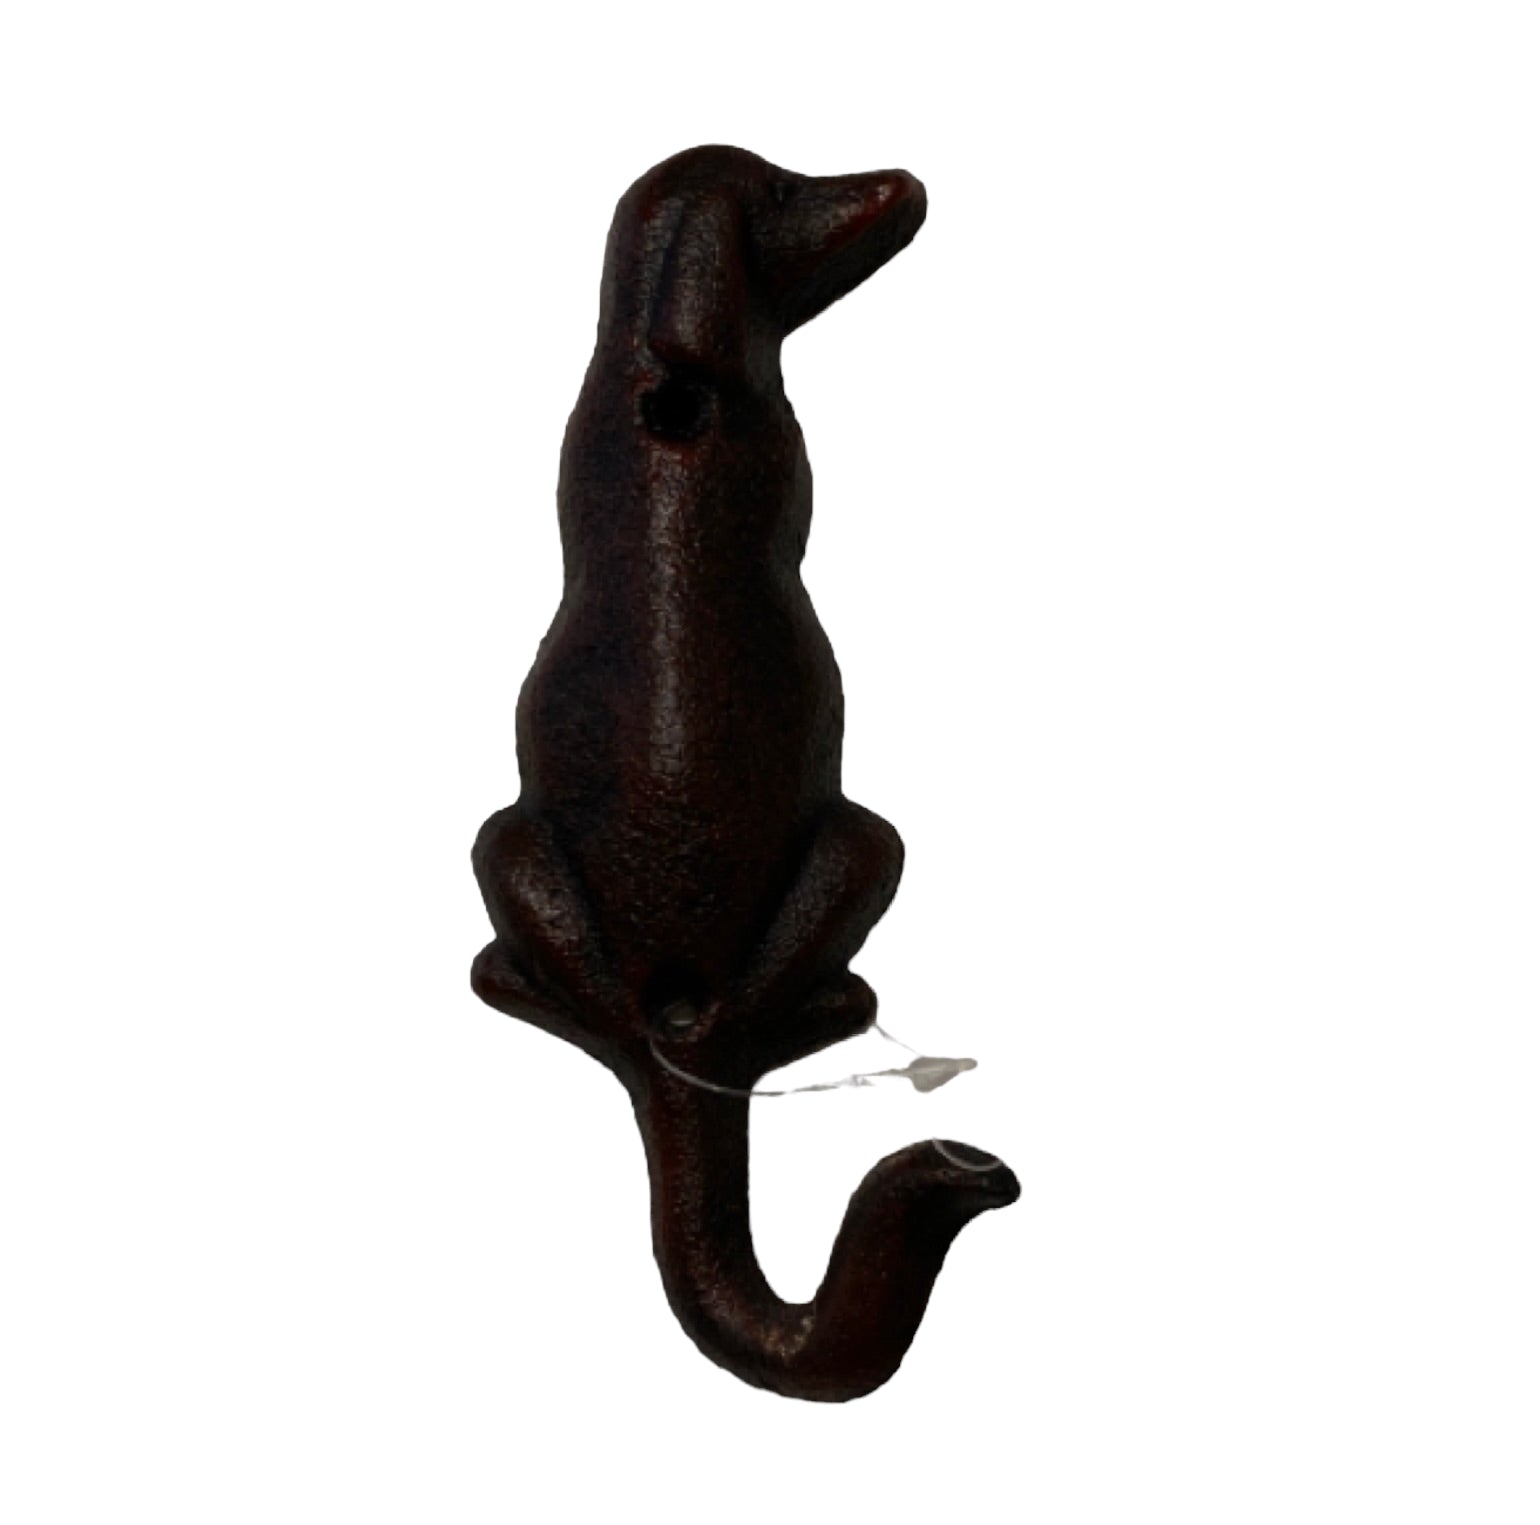 Hook Dog Lead Holder Pets Rustic Cast Iron - The Renmy Store Homewares & Gifts 